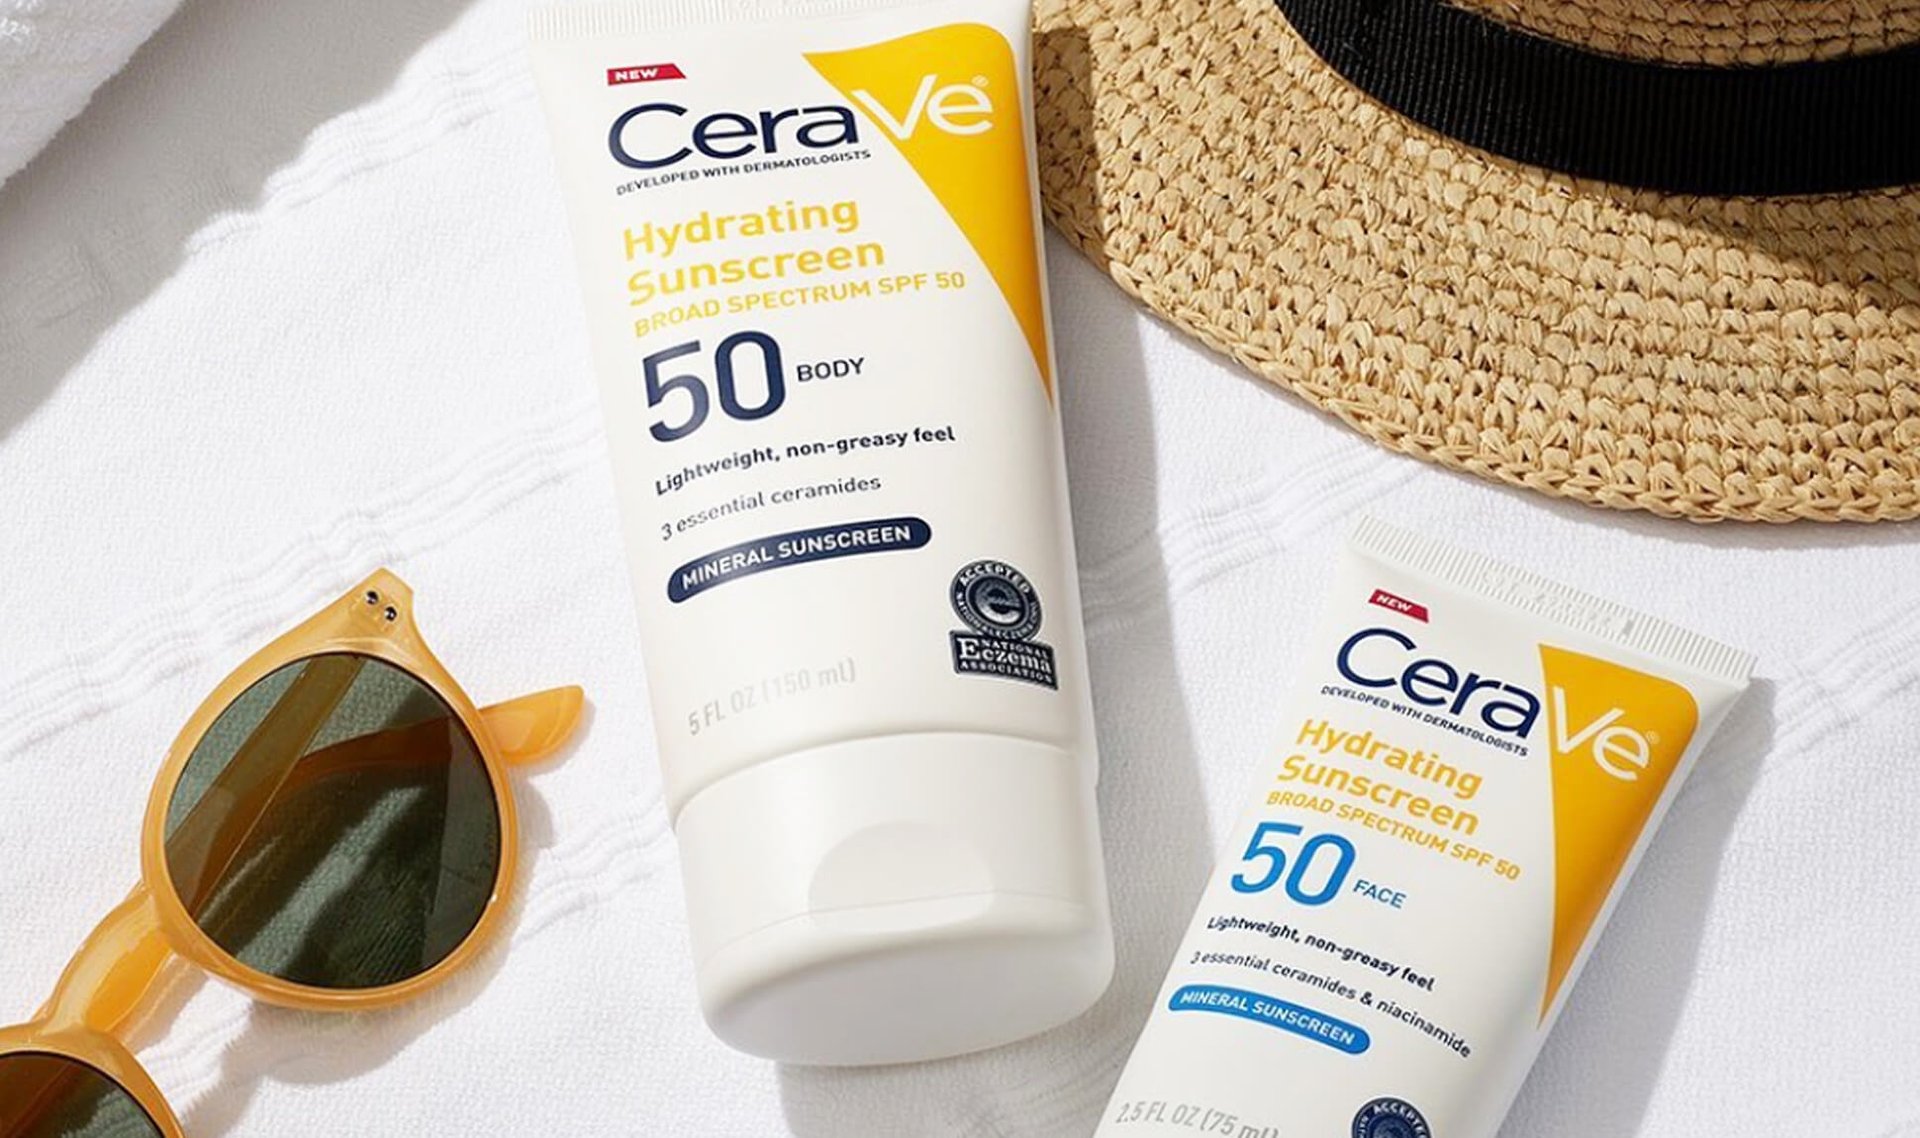 Buy Sunscreen at Target and Get a Free Gift Card — No Strings Attached 